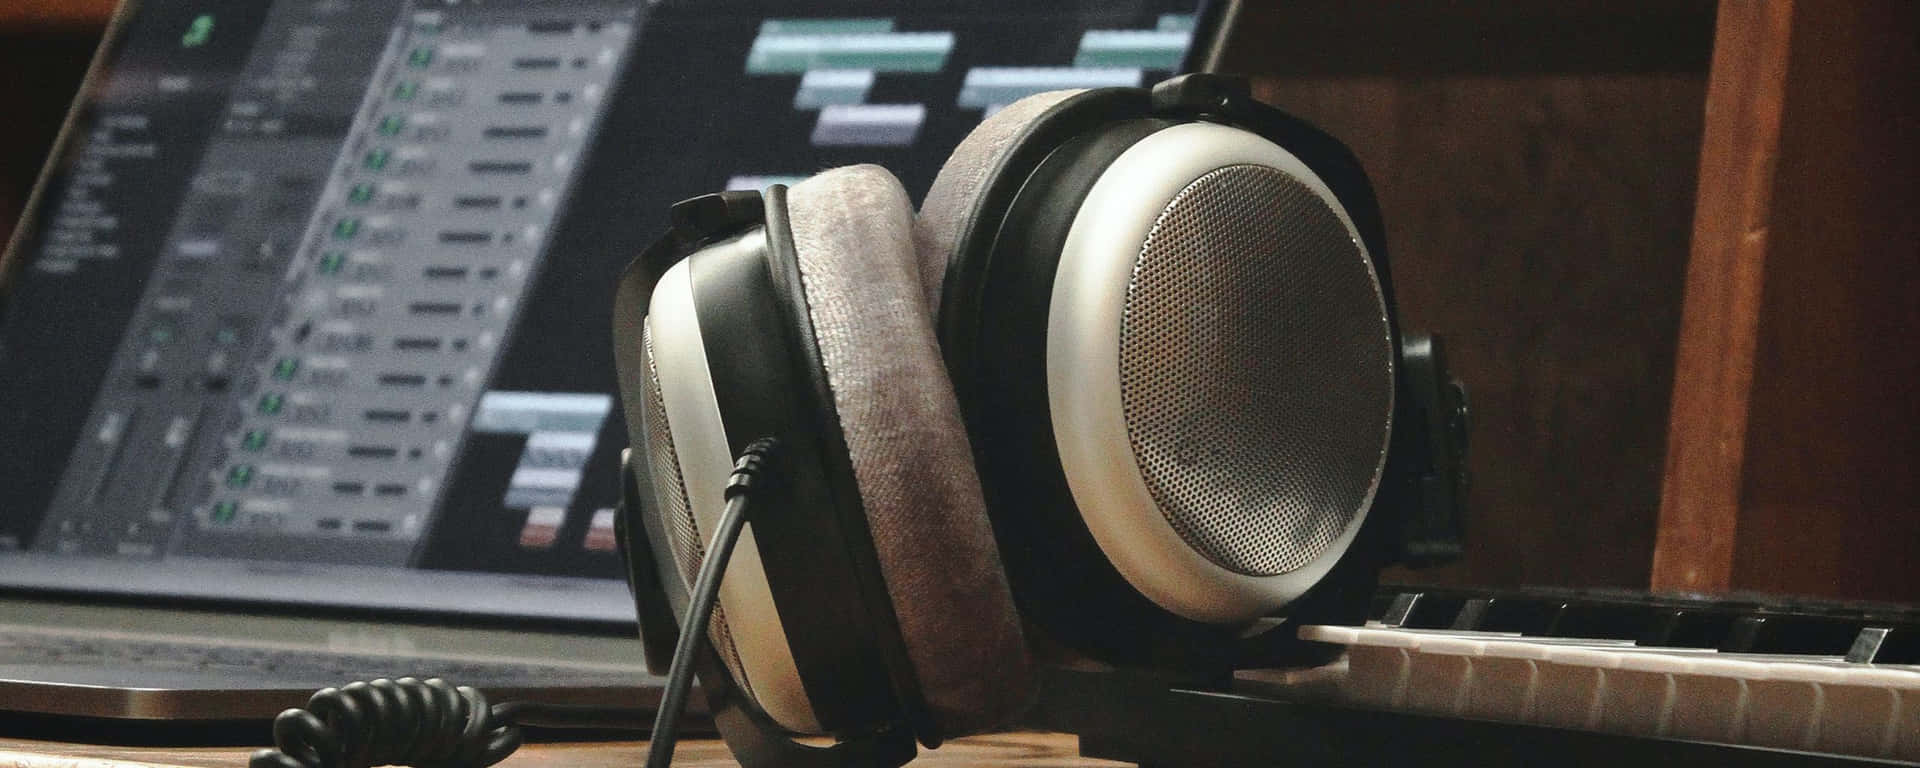 Tune-in and turn-on with headphones and laptop. Wallpaper